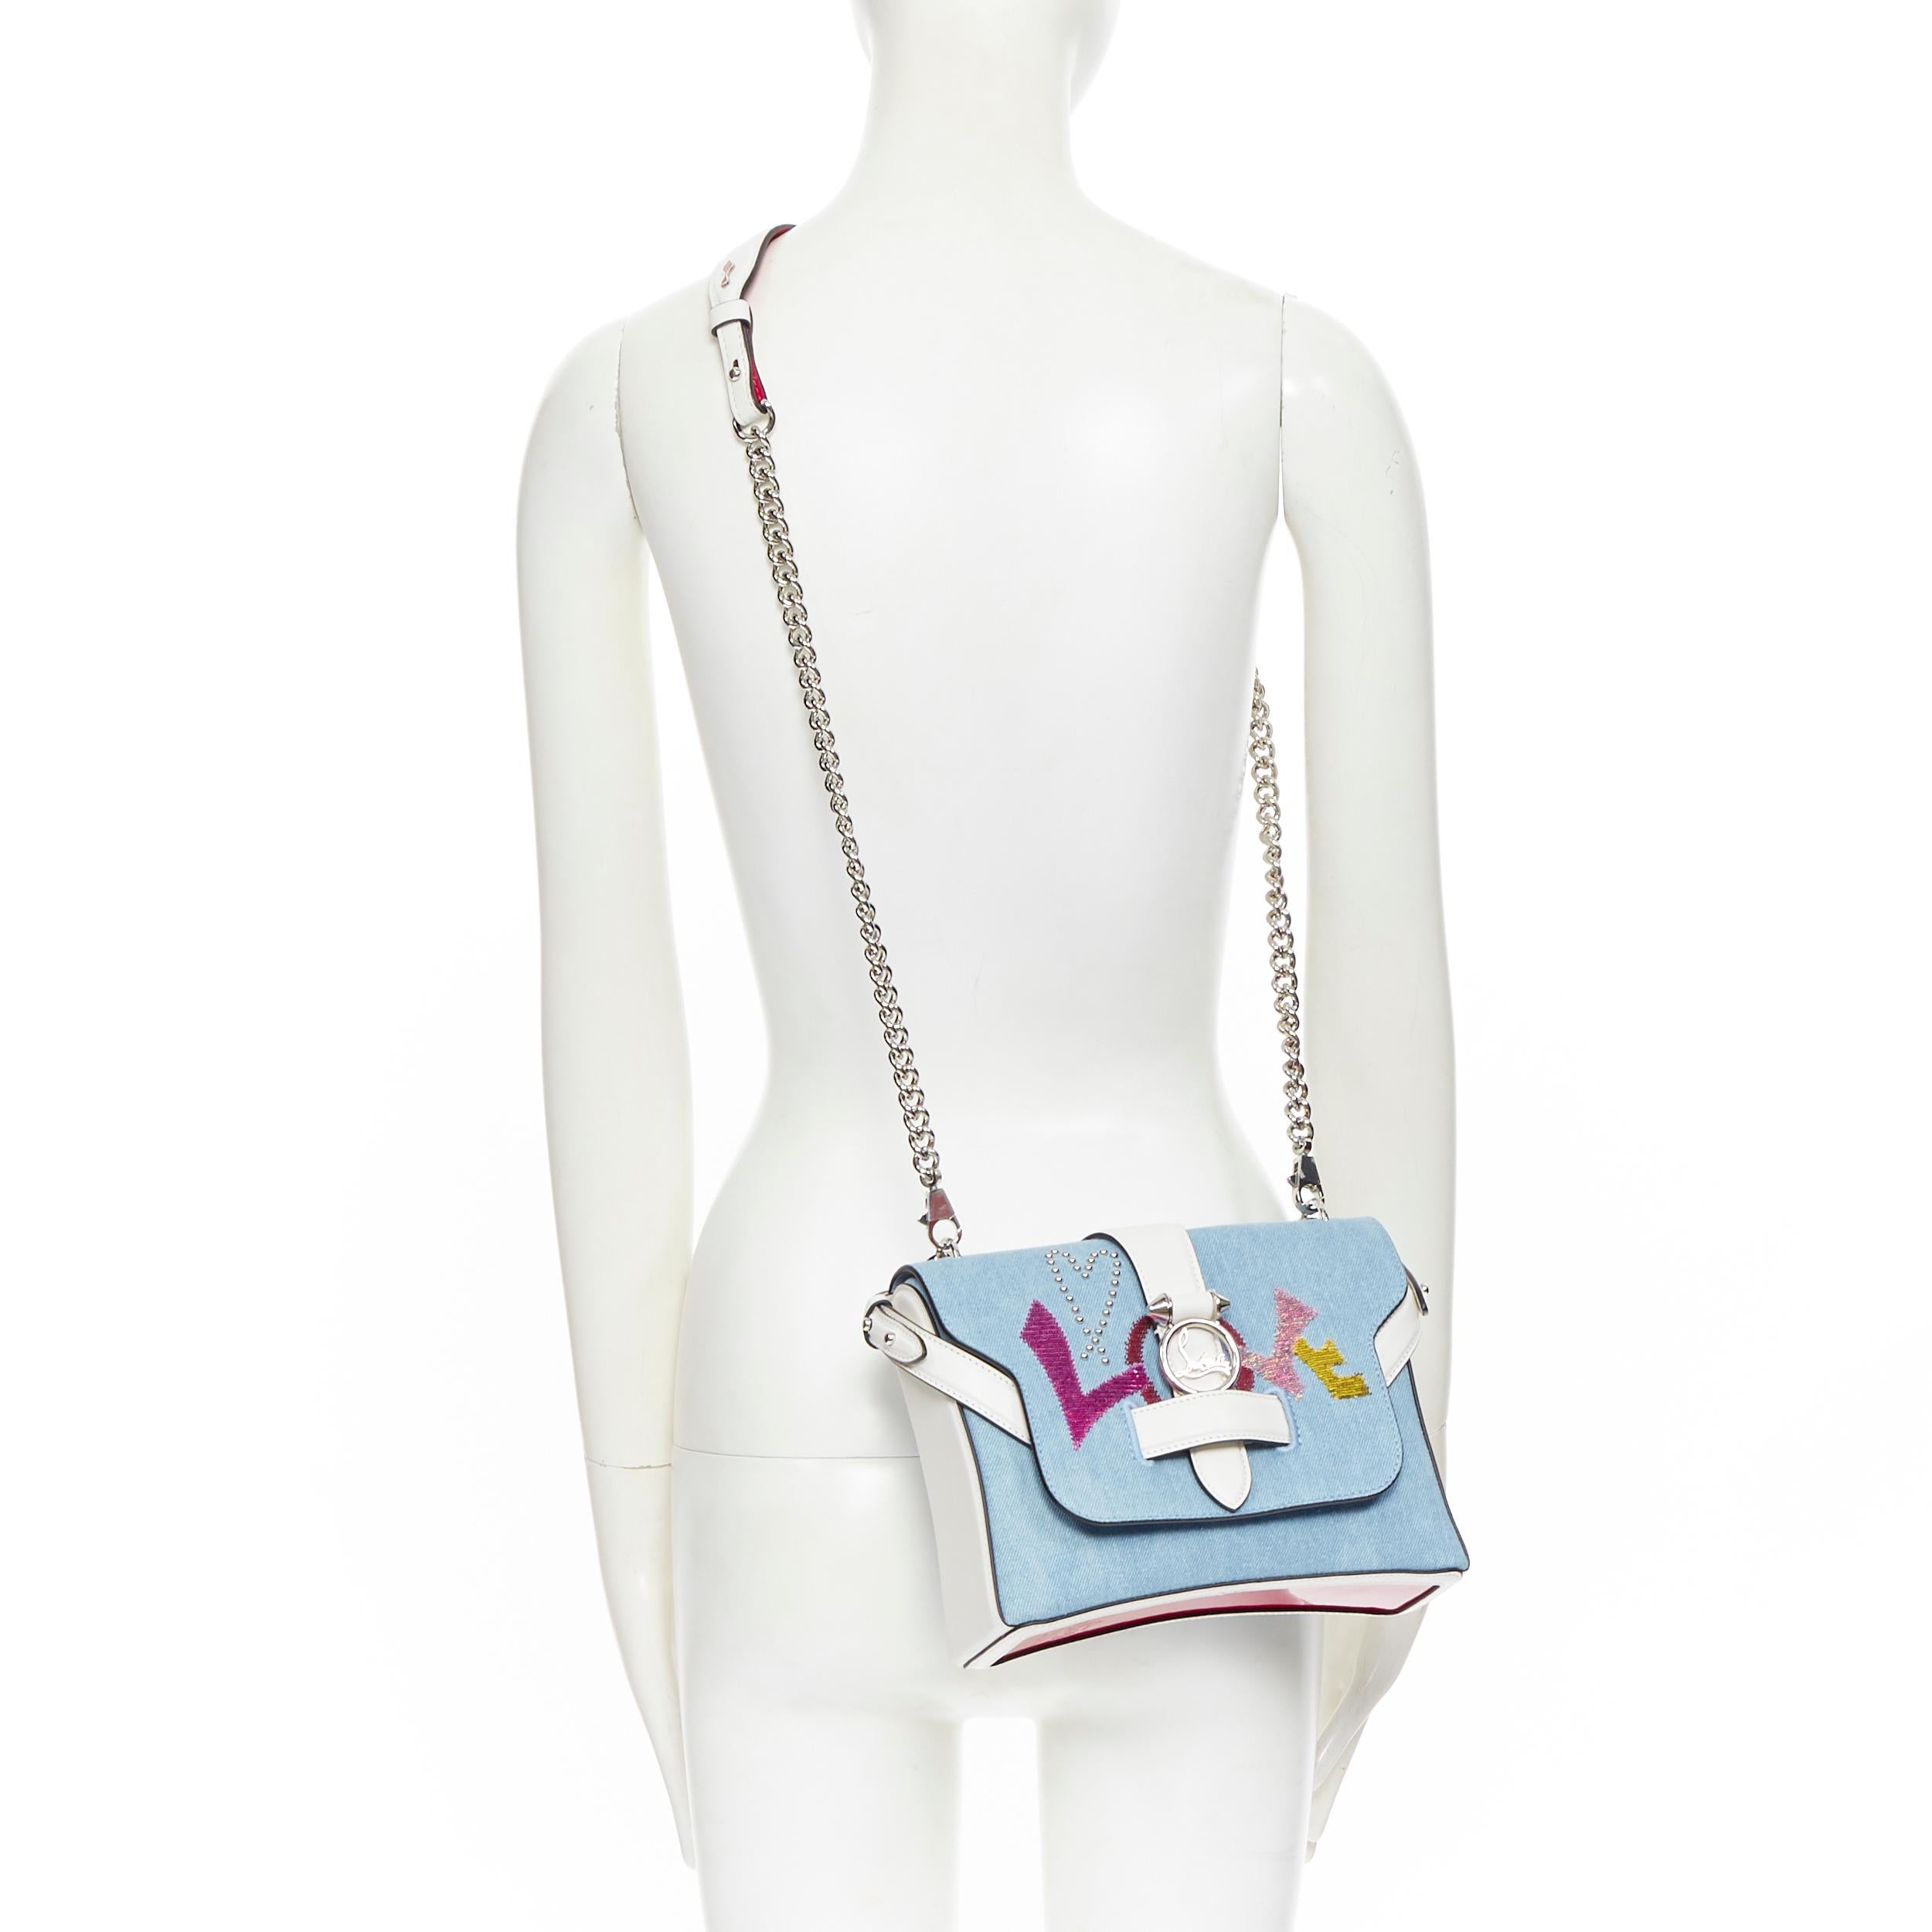 new CHRISTIAN LOUBOUTIN Rubylou Small Love blue denim dual chain crossbody bag
Brand: Christian Louboutin
Designer: Christian Louboutin
Model Name / Style: Rubylou
Material: Denim
Color: Blue
Pattern: Solid
Extra Detail: Light blue denim upper.